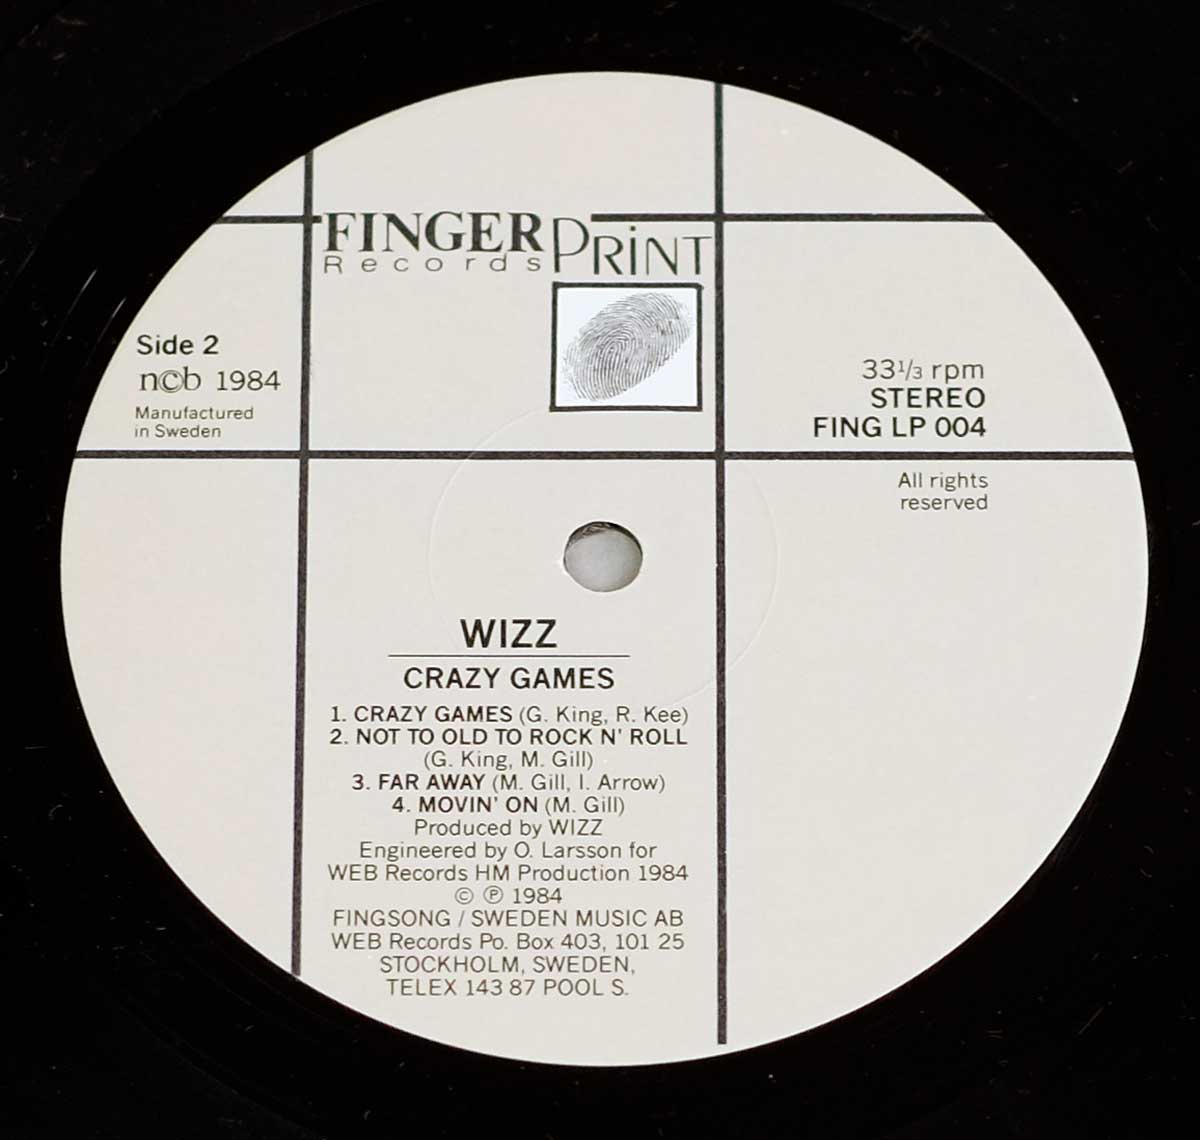 Photo of "WIZZ - Crazy Games" Record Label - Side Two: